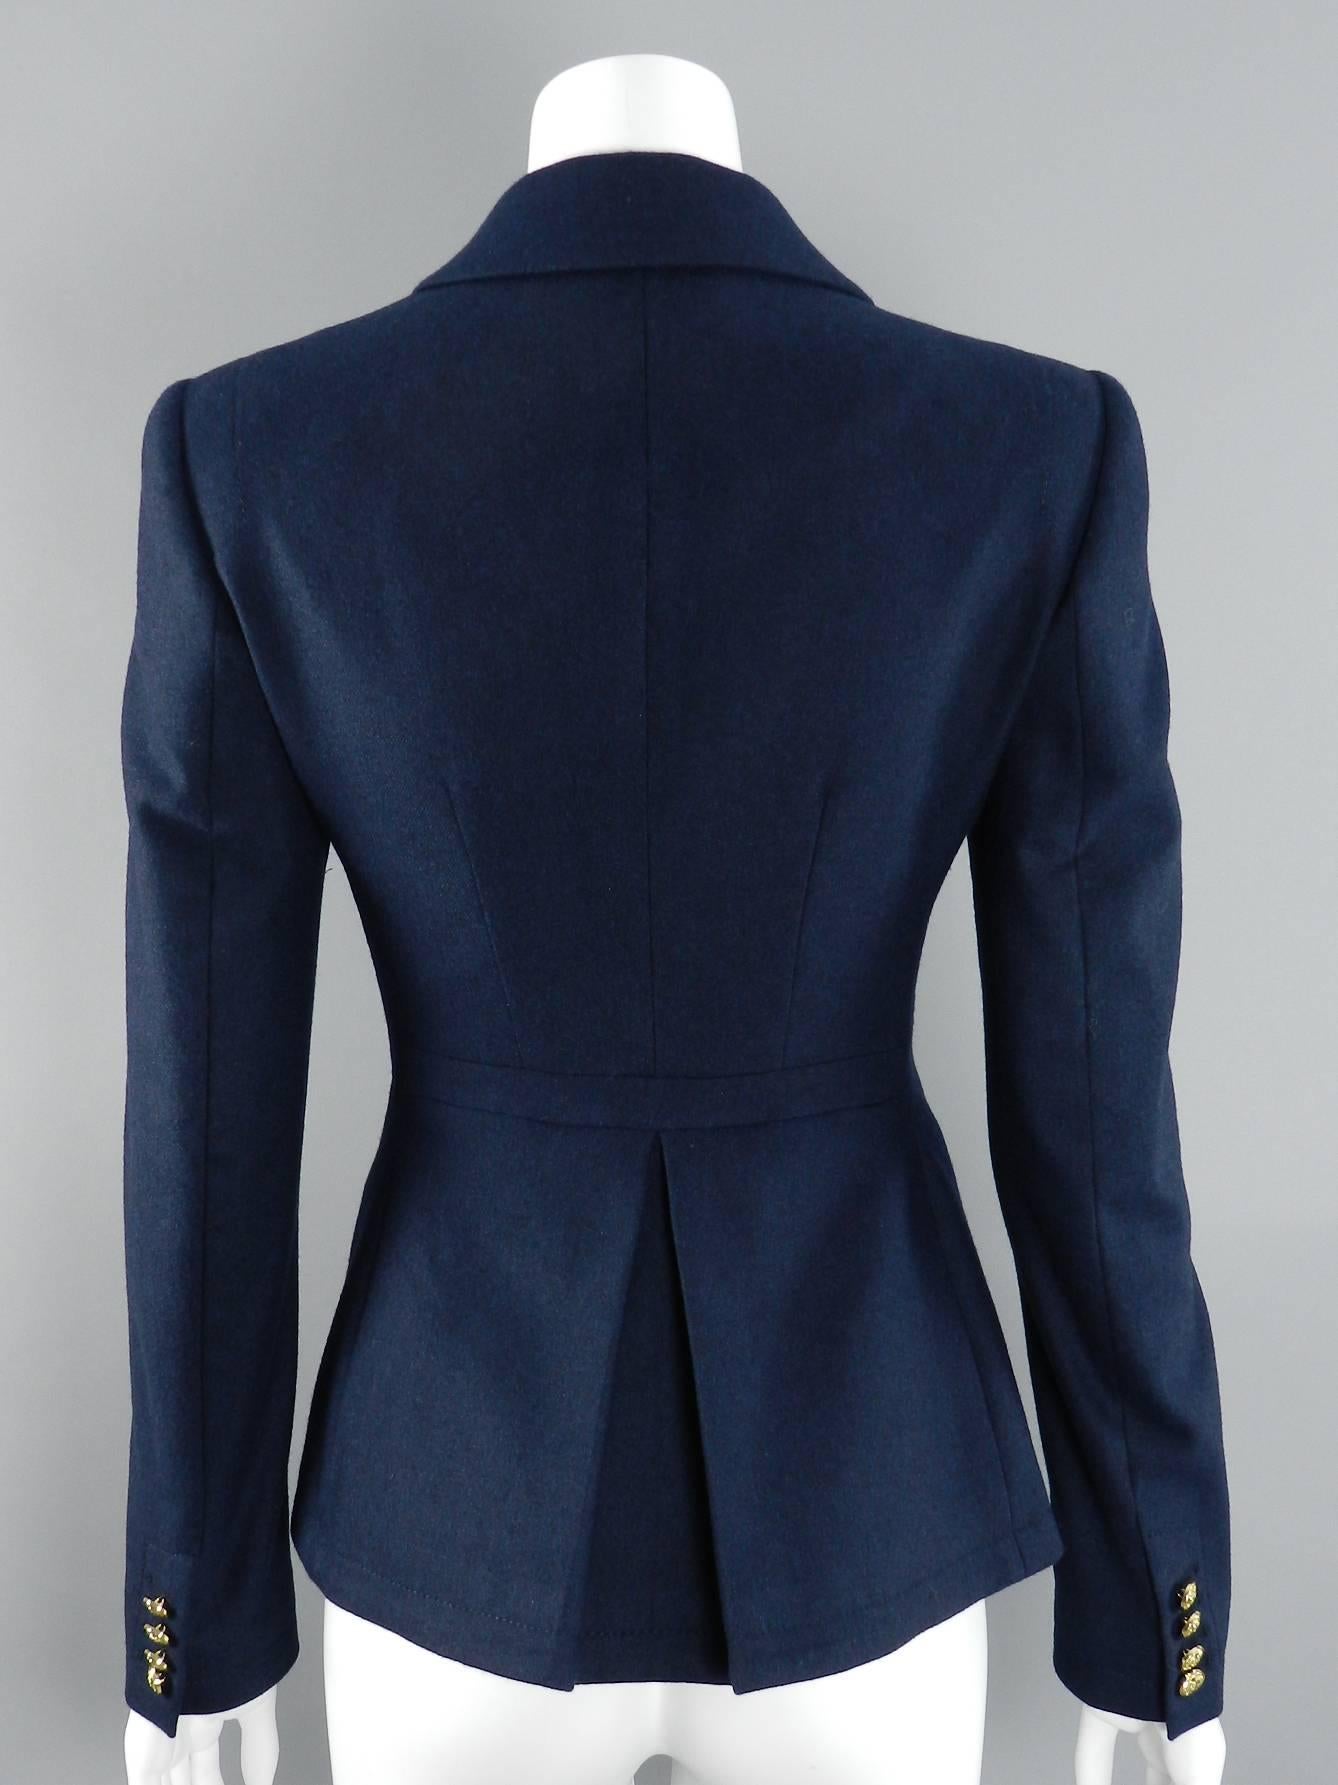 Altuzarra Navy Military Runway Jacket with Gold Buttons 1